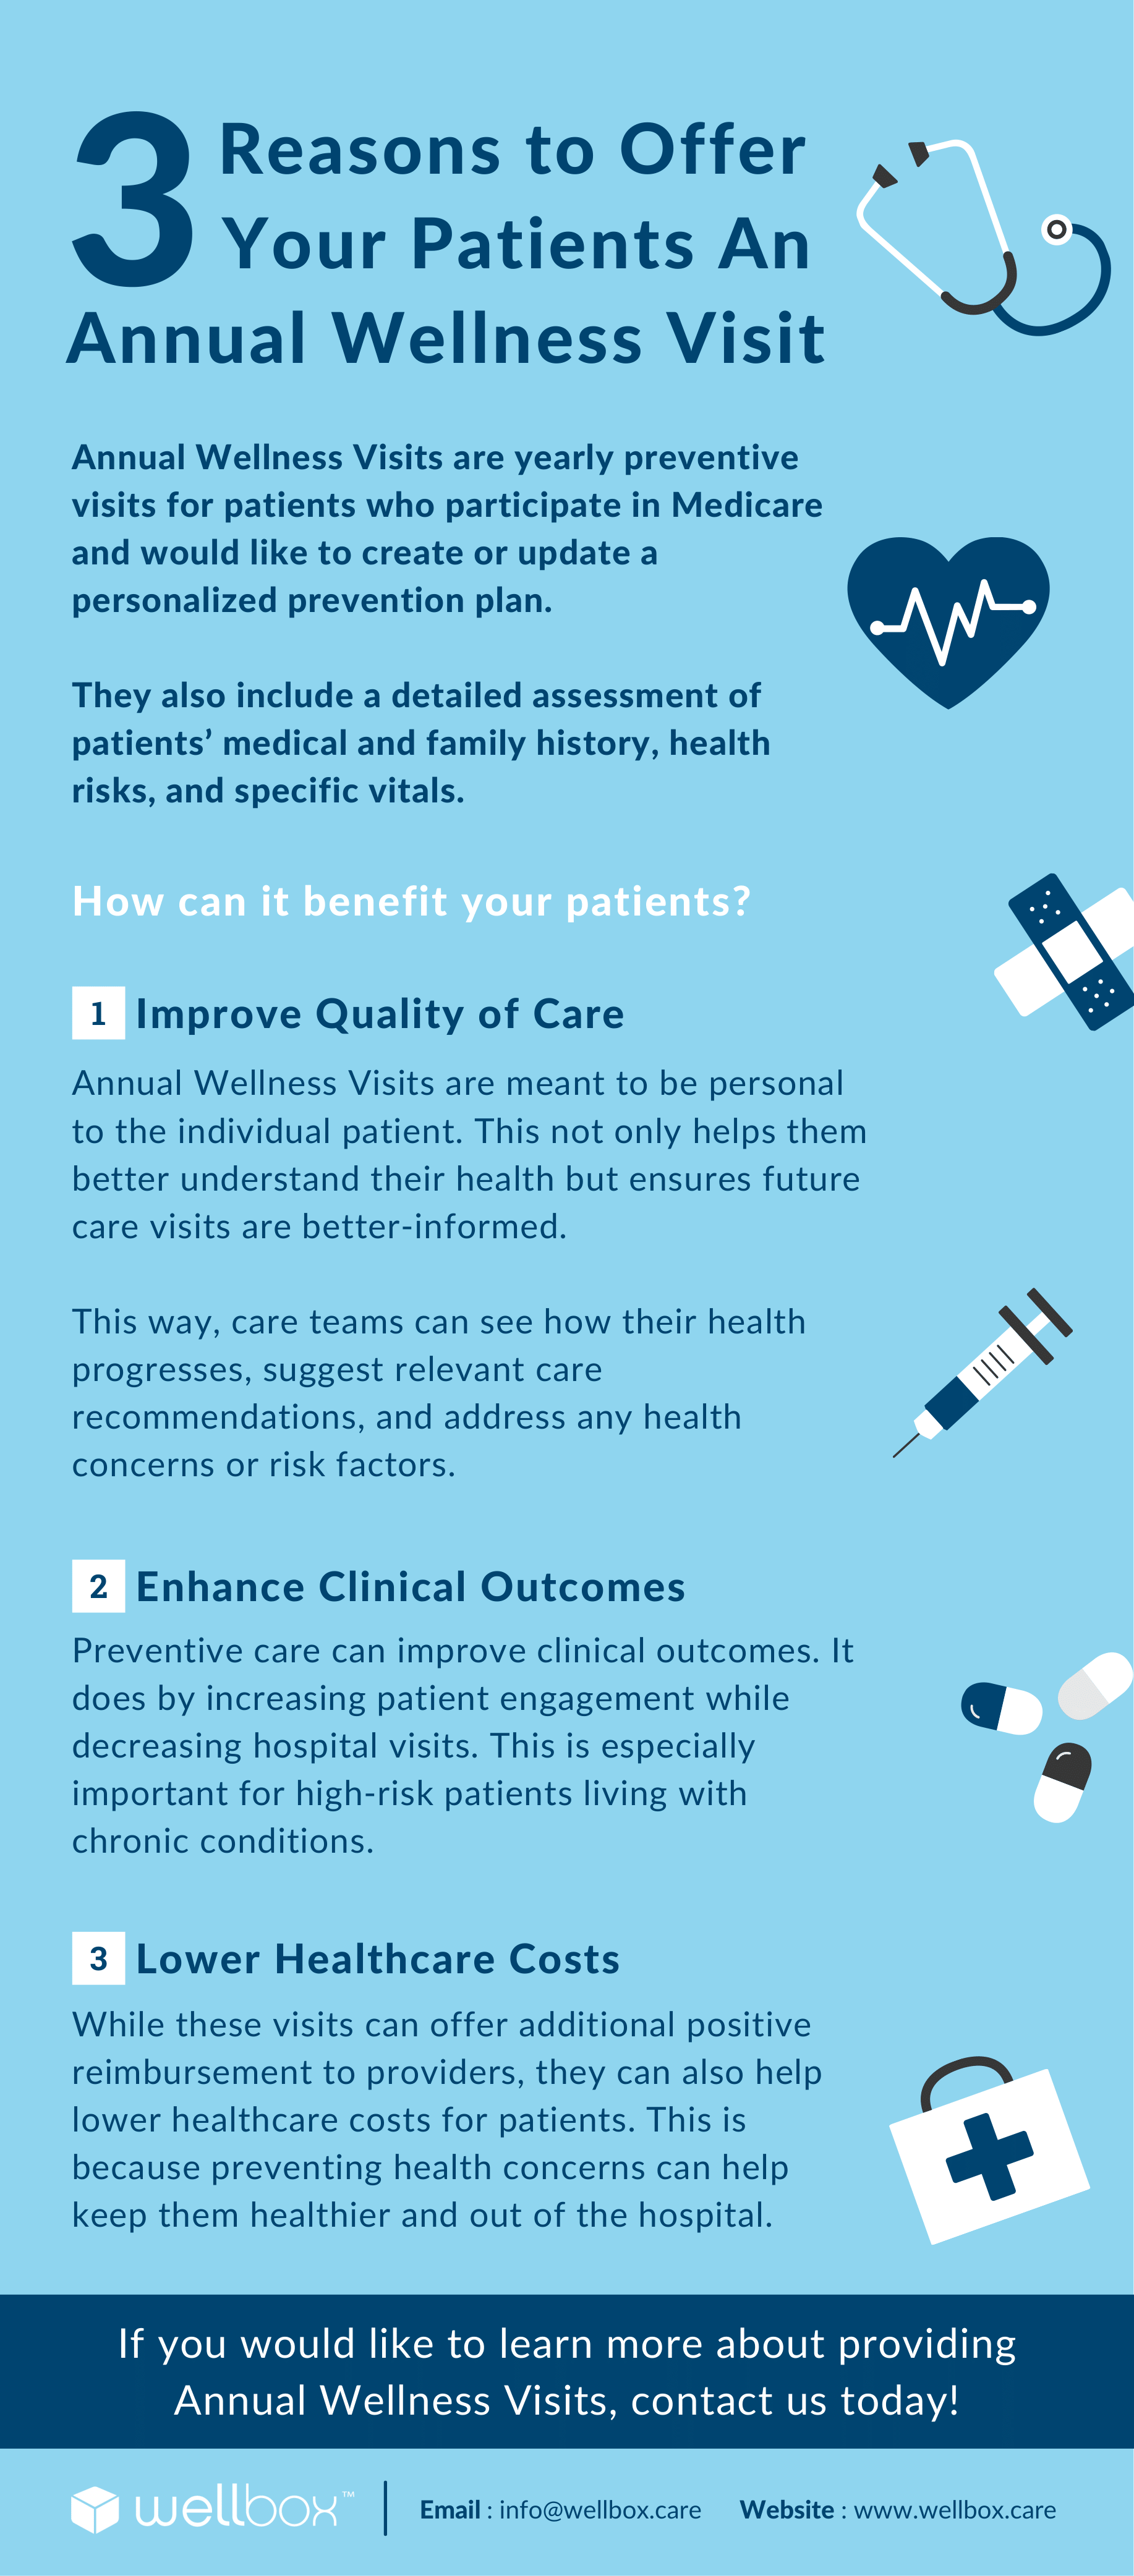 Check out the infographic to learn more about the benefits Annual Wellness Visits can offer your patients.